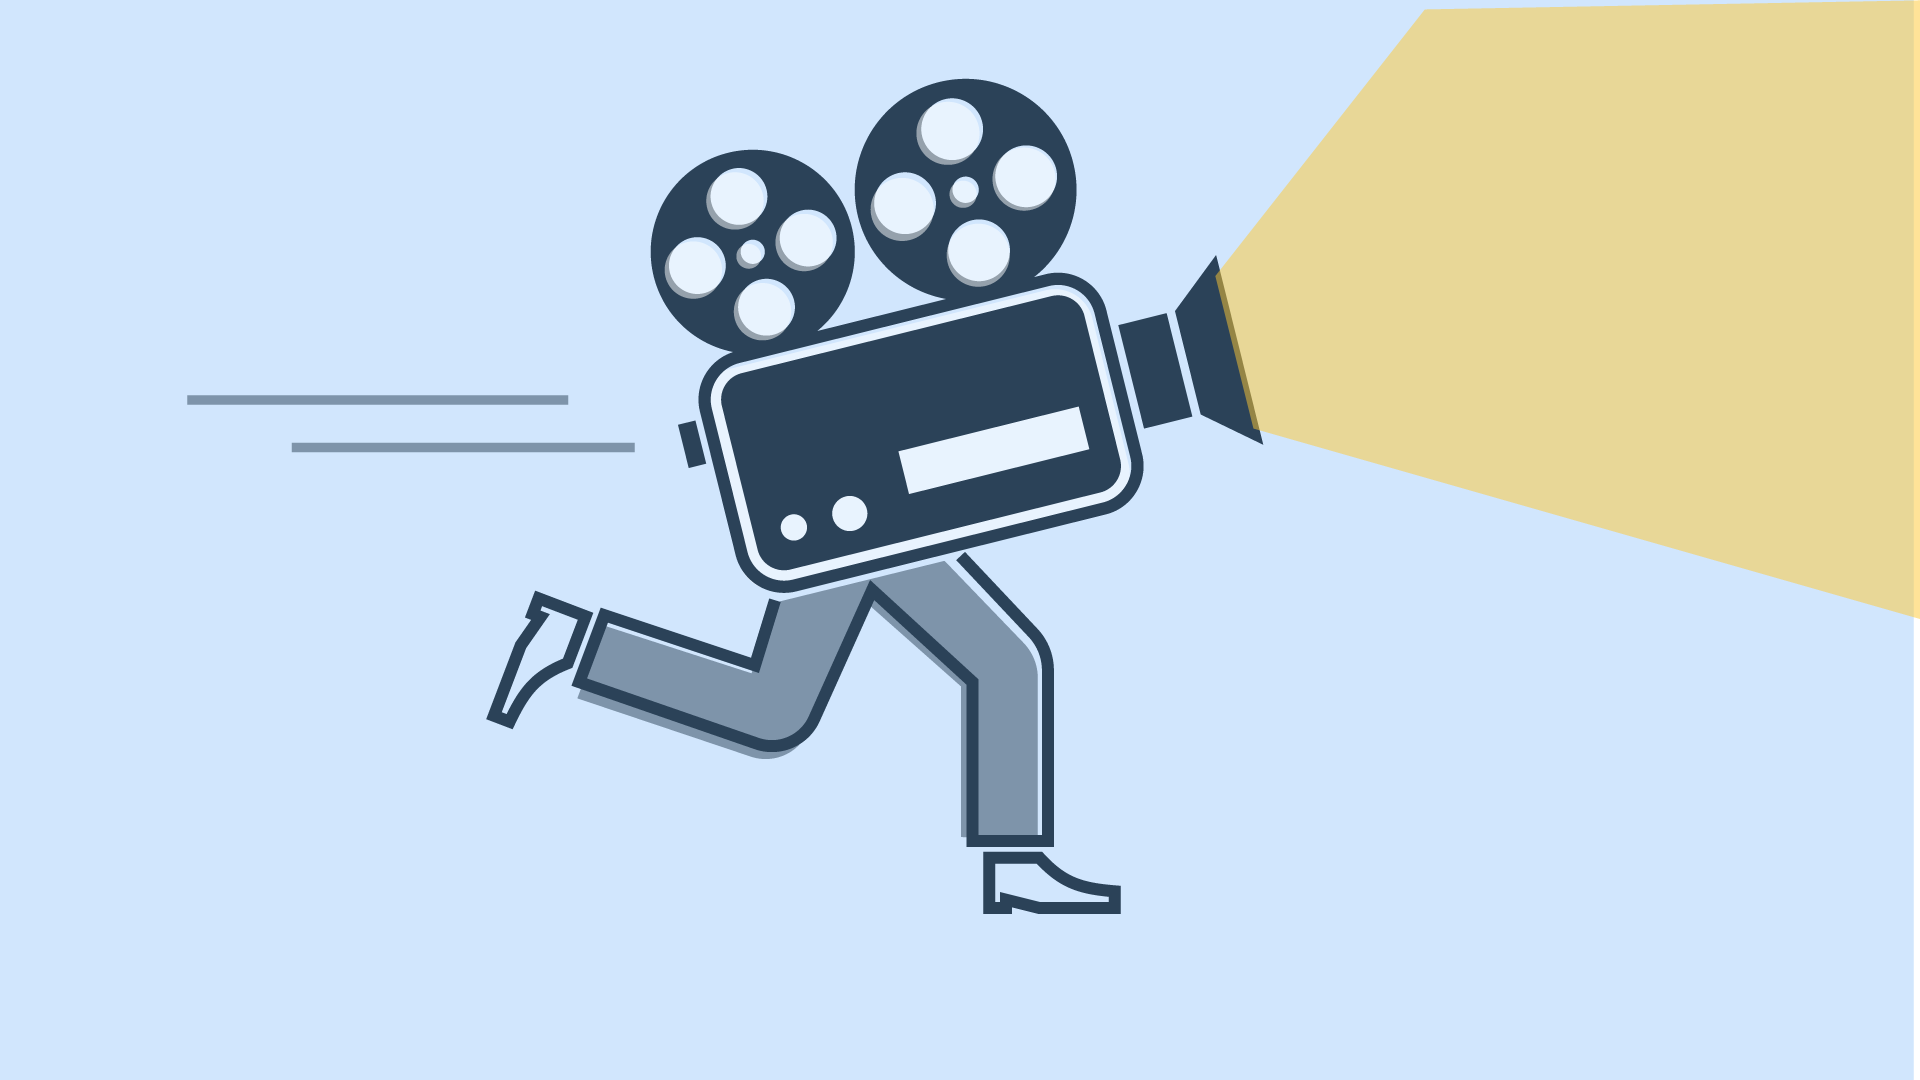 A film projector runs - on two human legs. Icon for ORANGE MOVING MOVIES, our moving image formats.